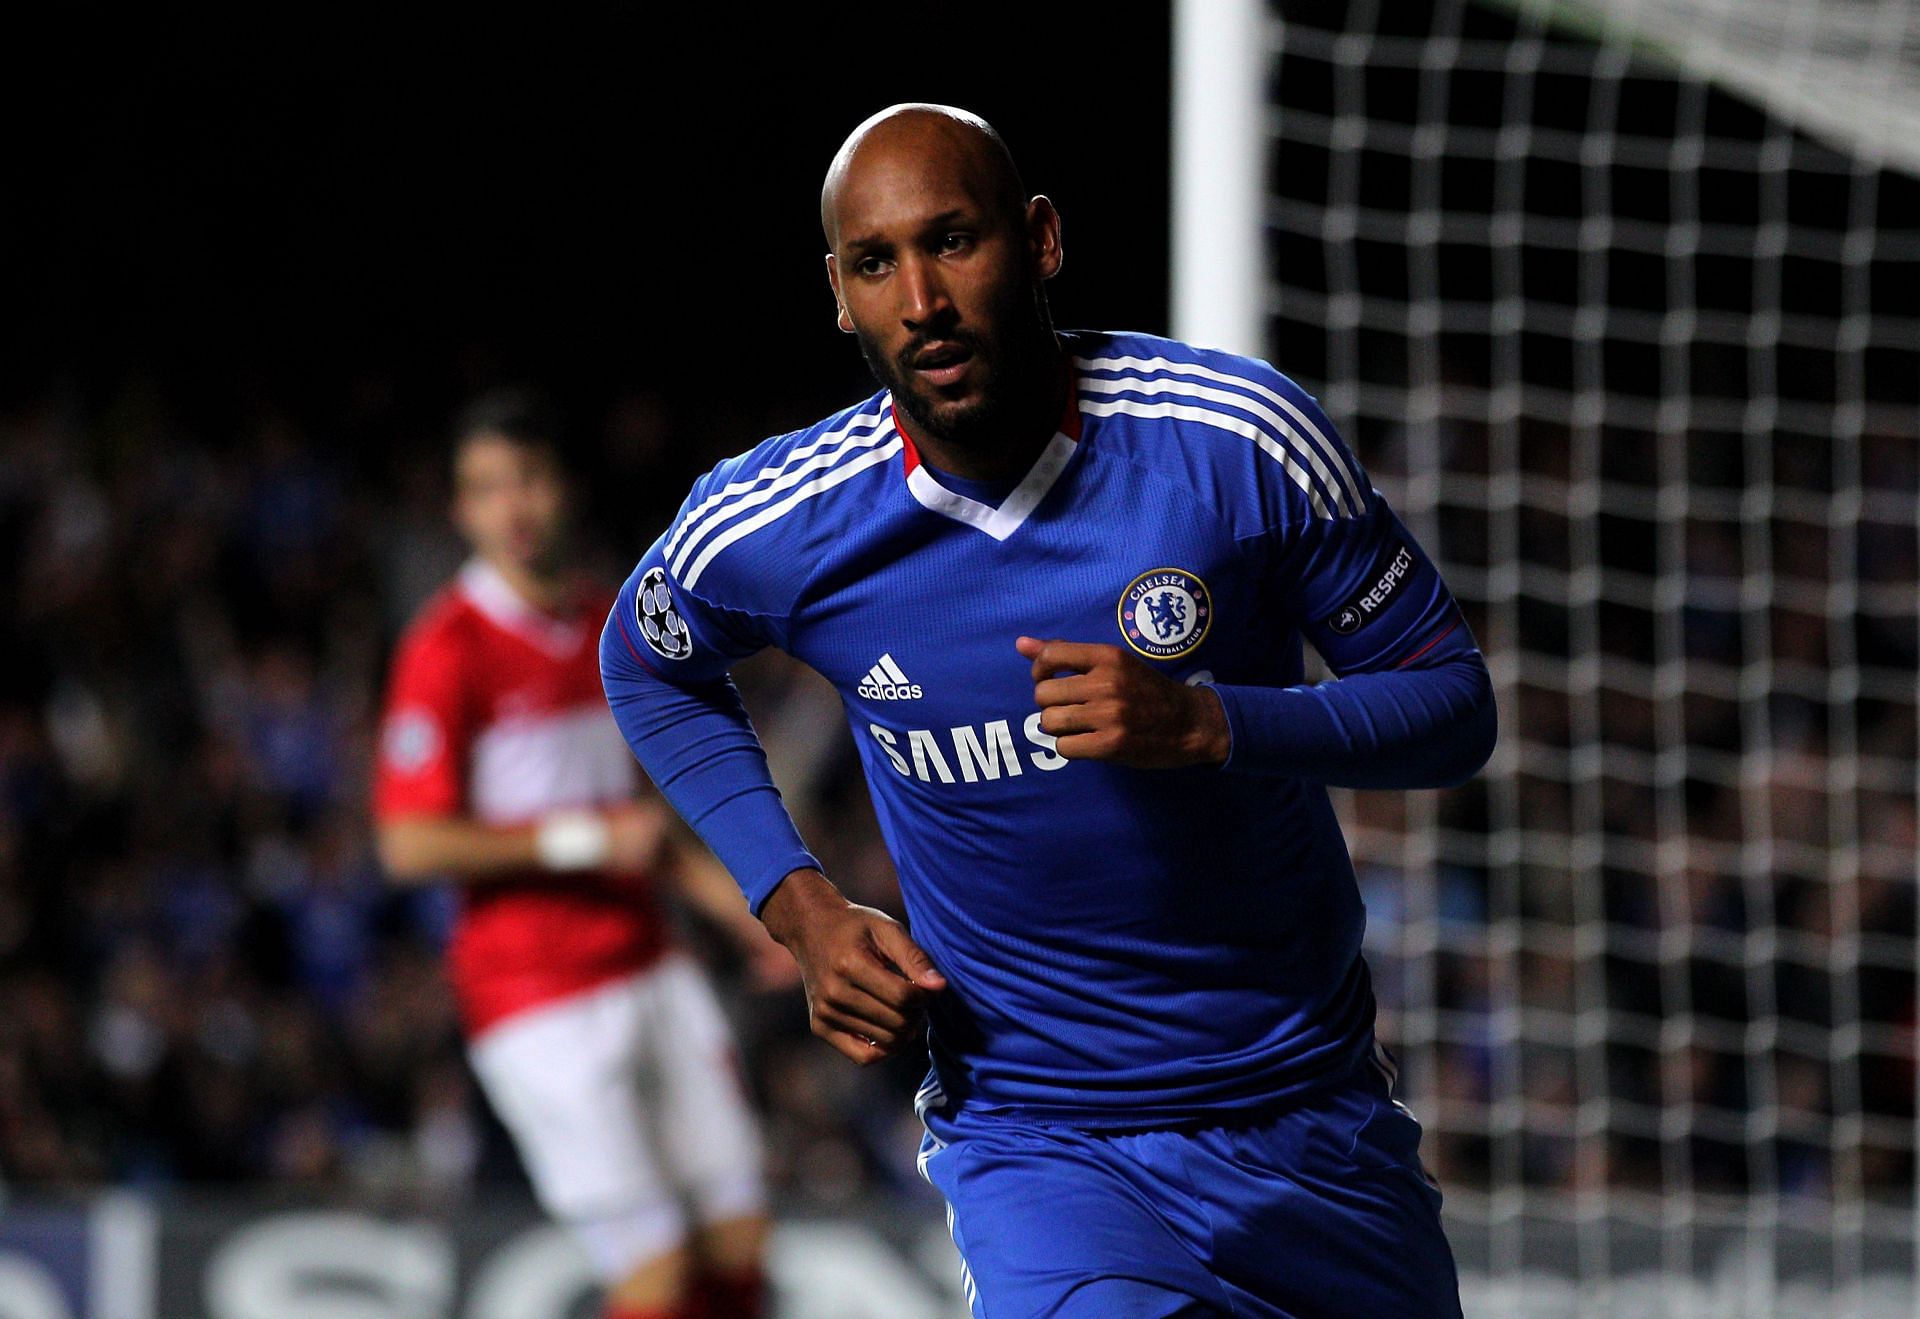 Anelka won a total of seven trophies with the two London clubs